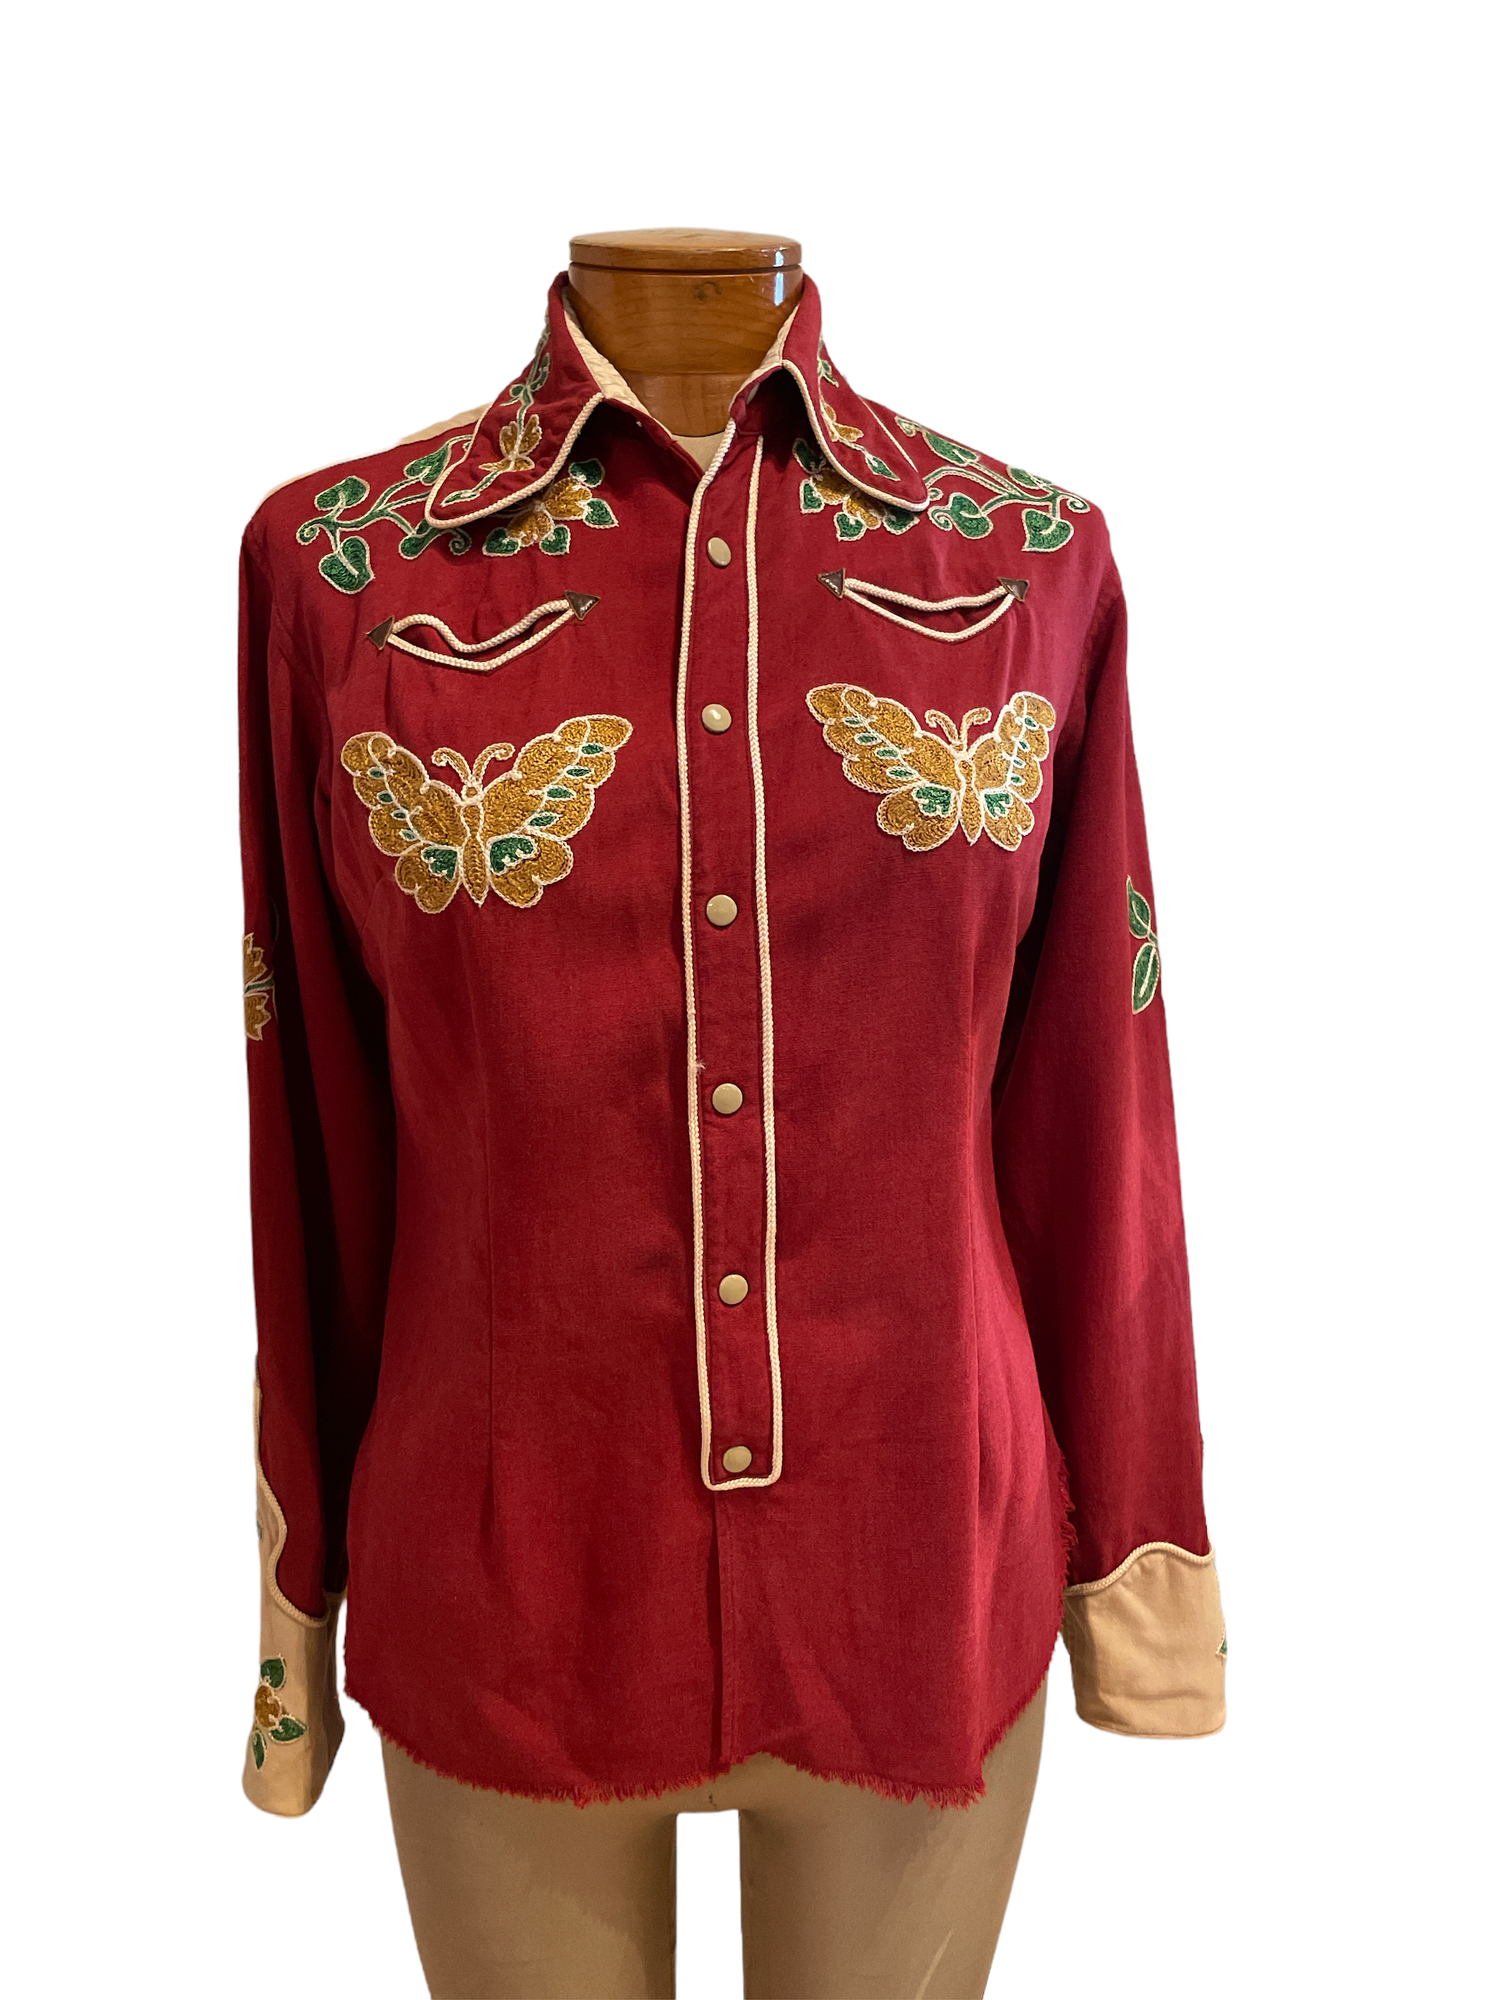 Authentic 1940's Rare Vintage Frontex Company Embroidered Western  Rockabilly Shirt — Star Struck Vintage